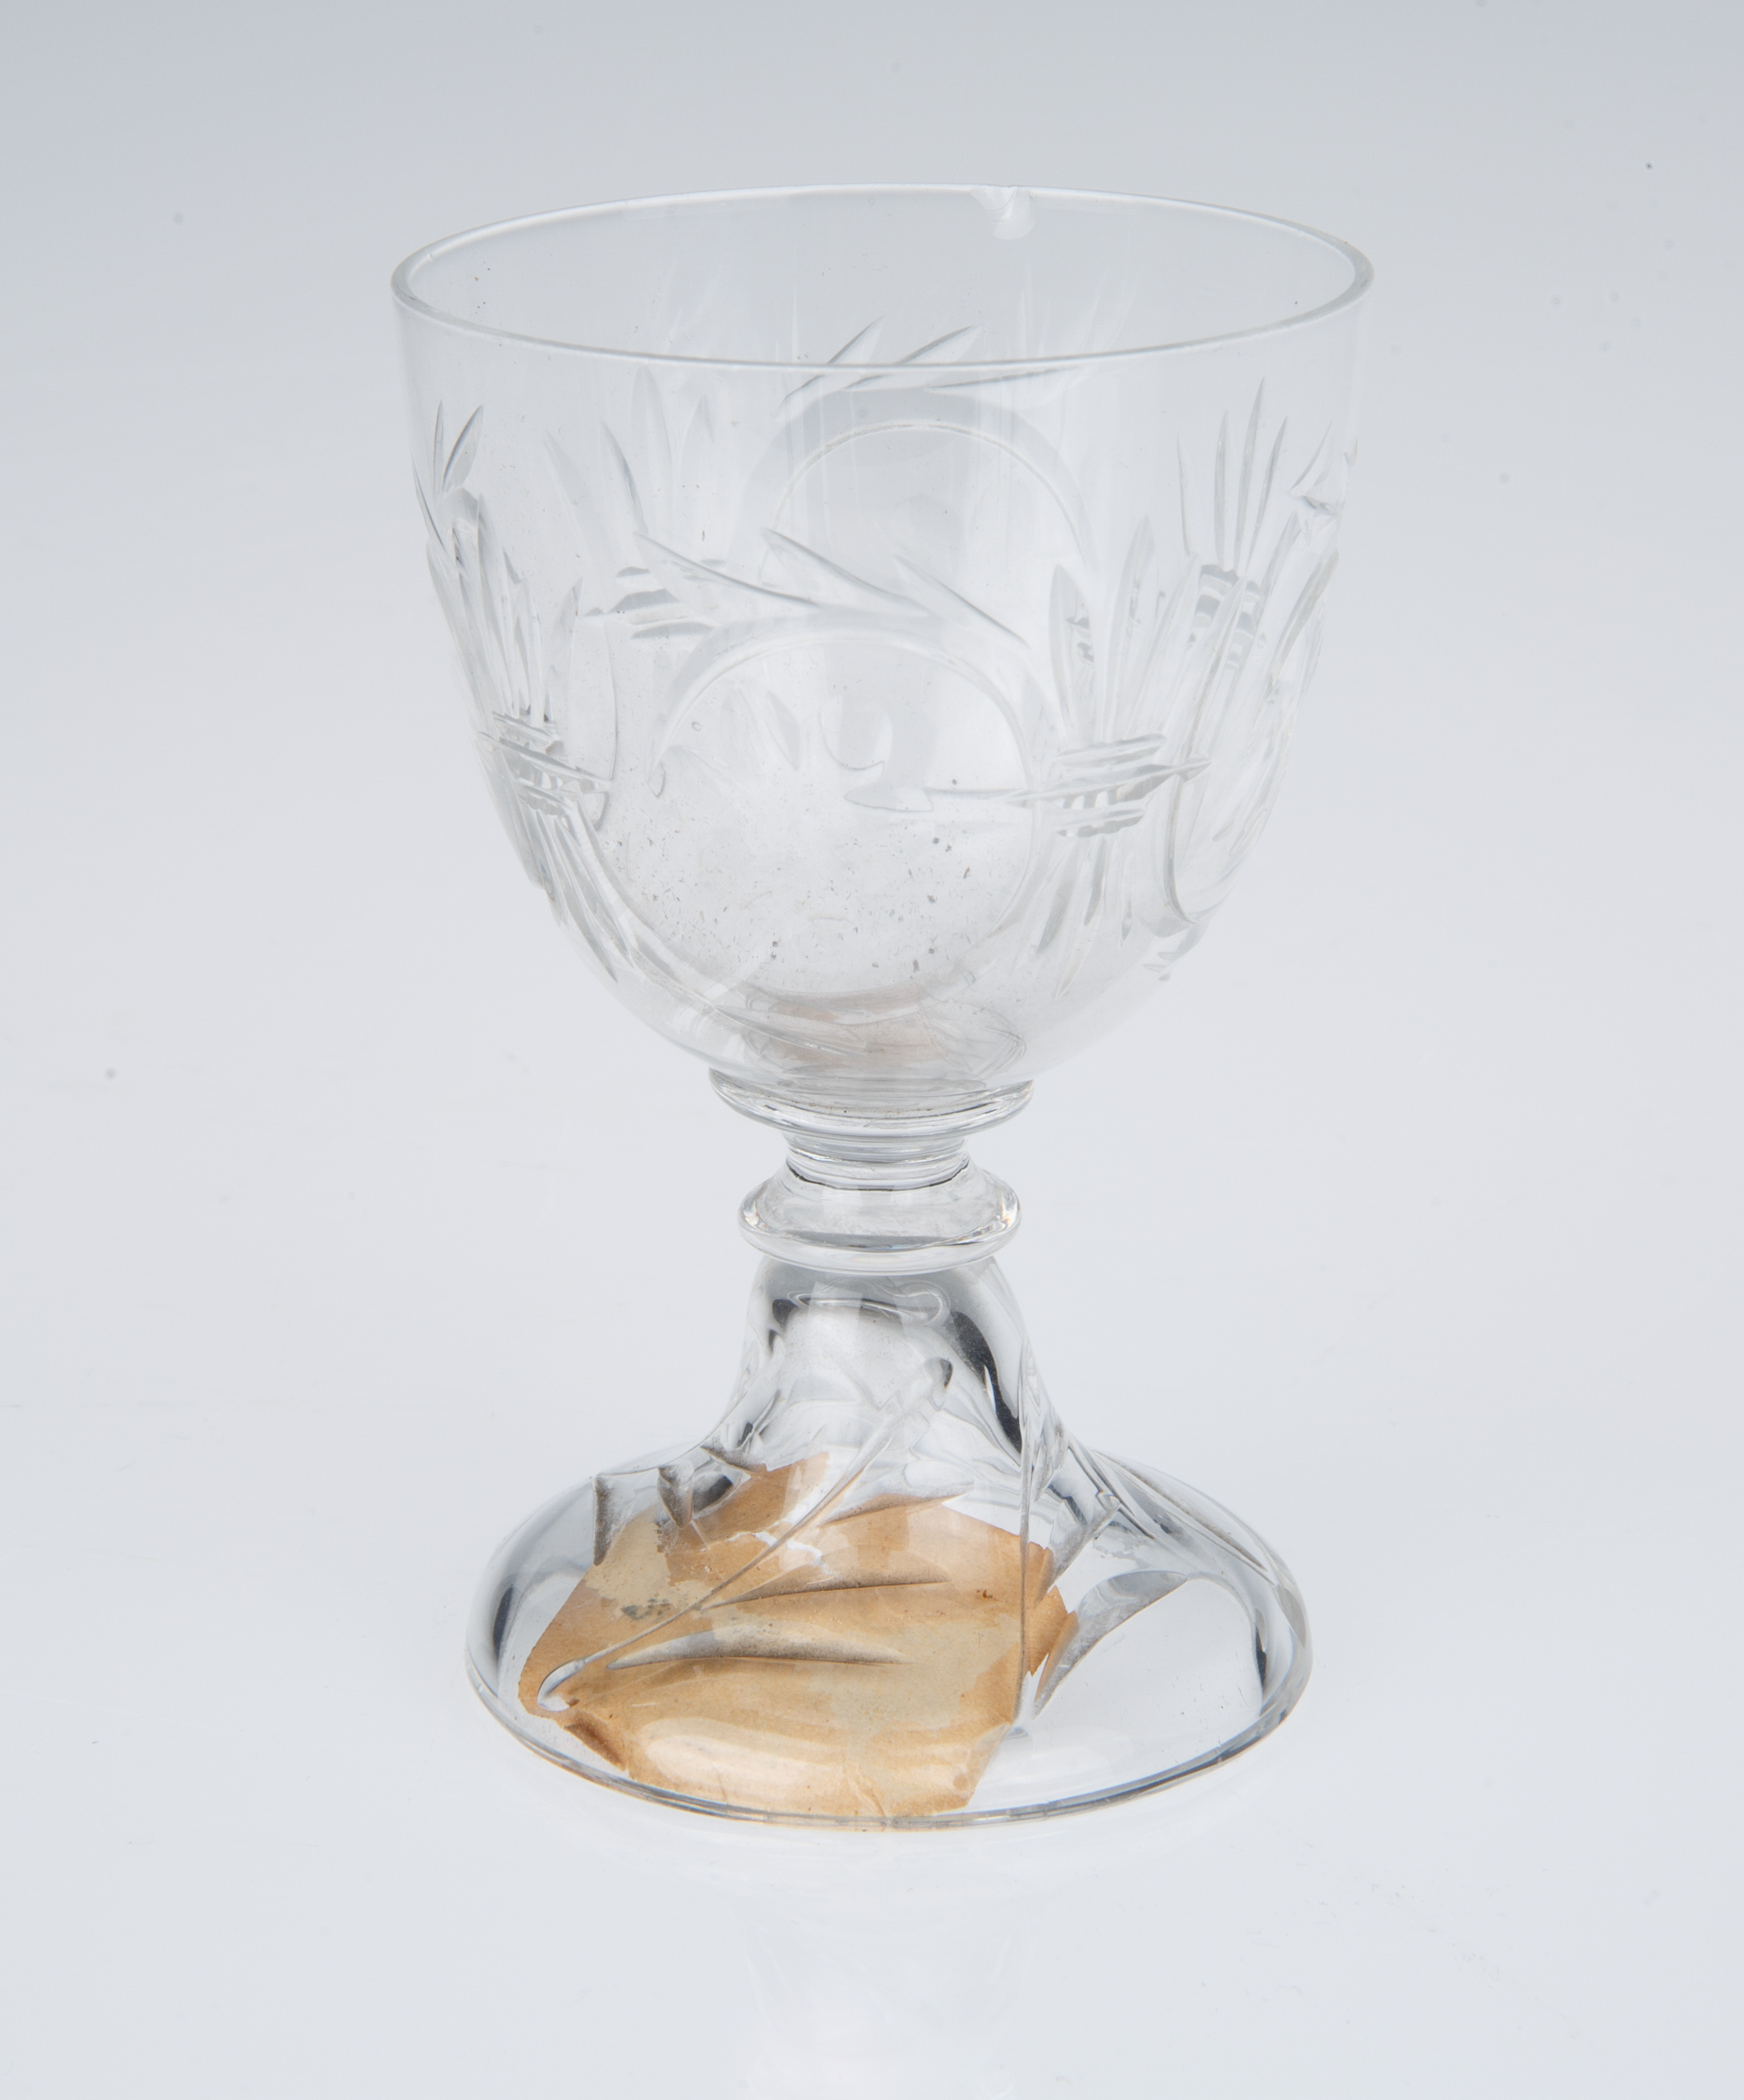 LATE 19TH CENTURY RUSSIAN WINE GLASS [WINTER PALACE, HAMMER GALLERIES] - Image 2 of 4